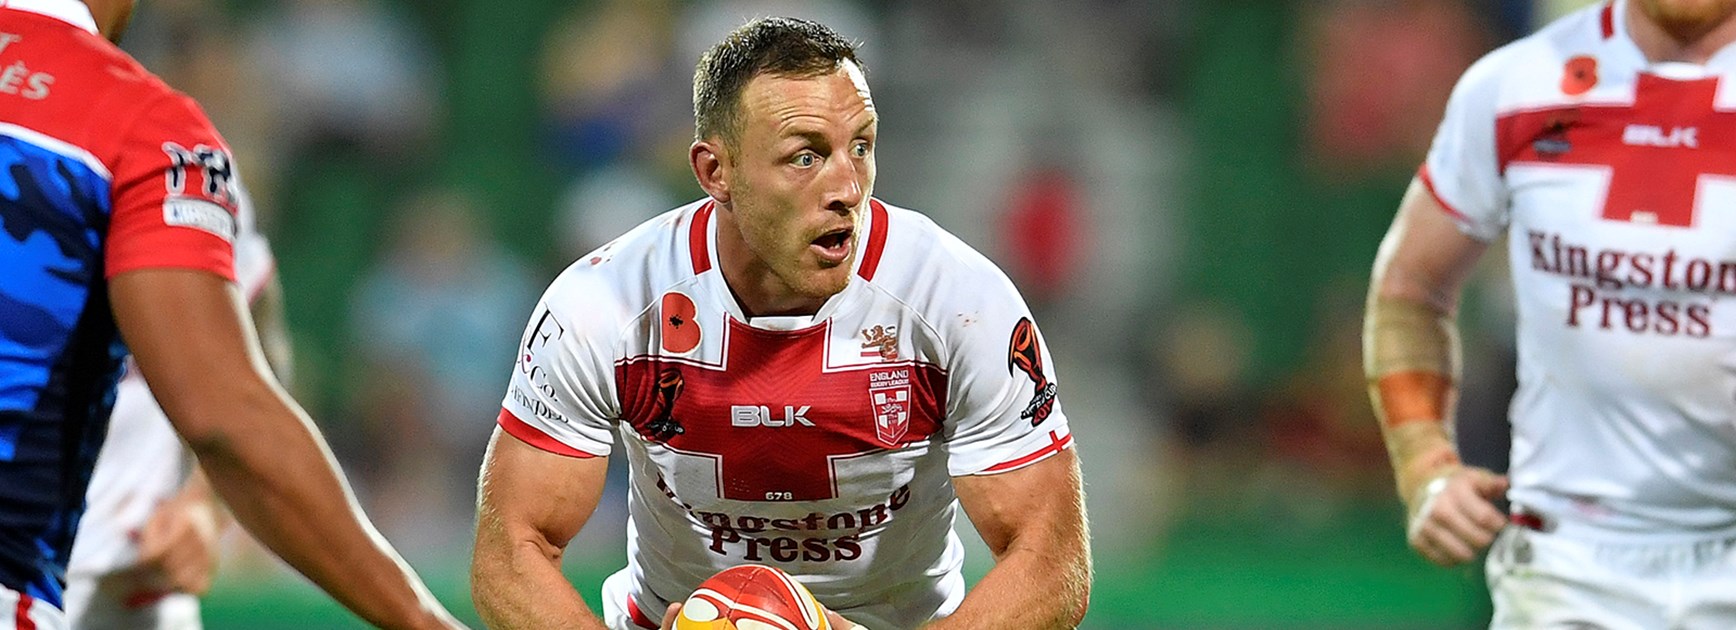 England's James Roby in action at the 2017 Rugby League World Cup.